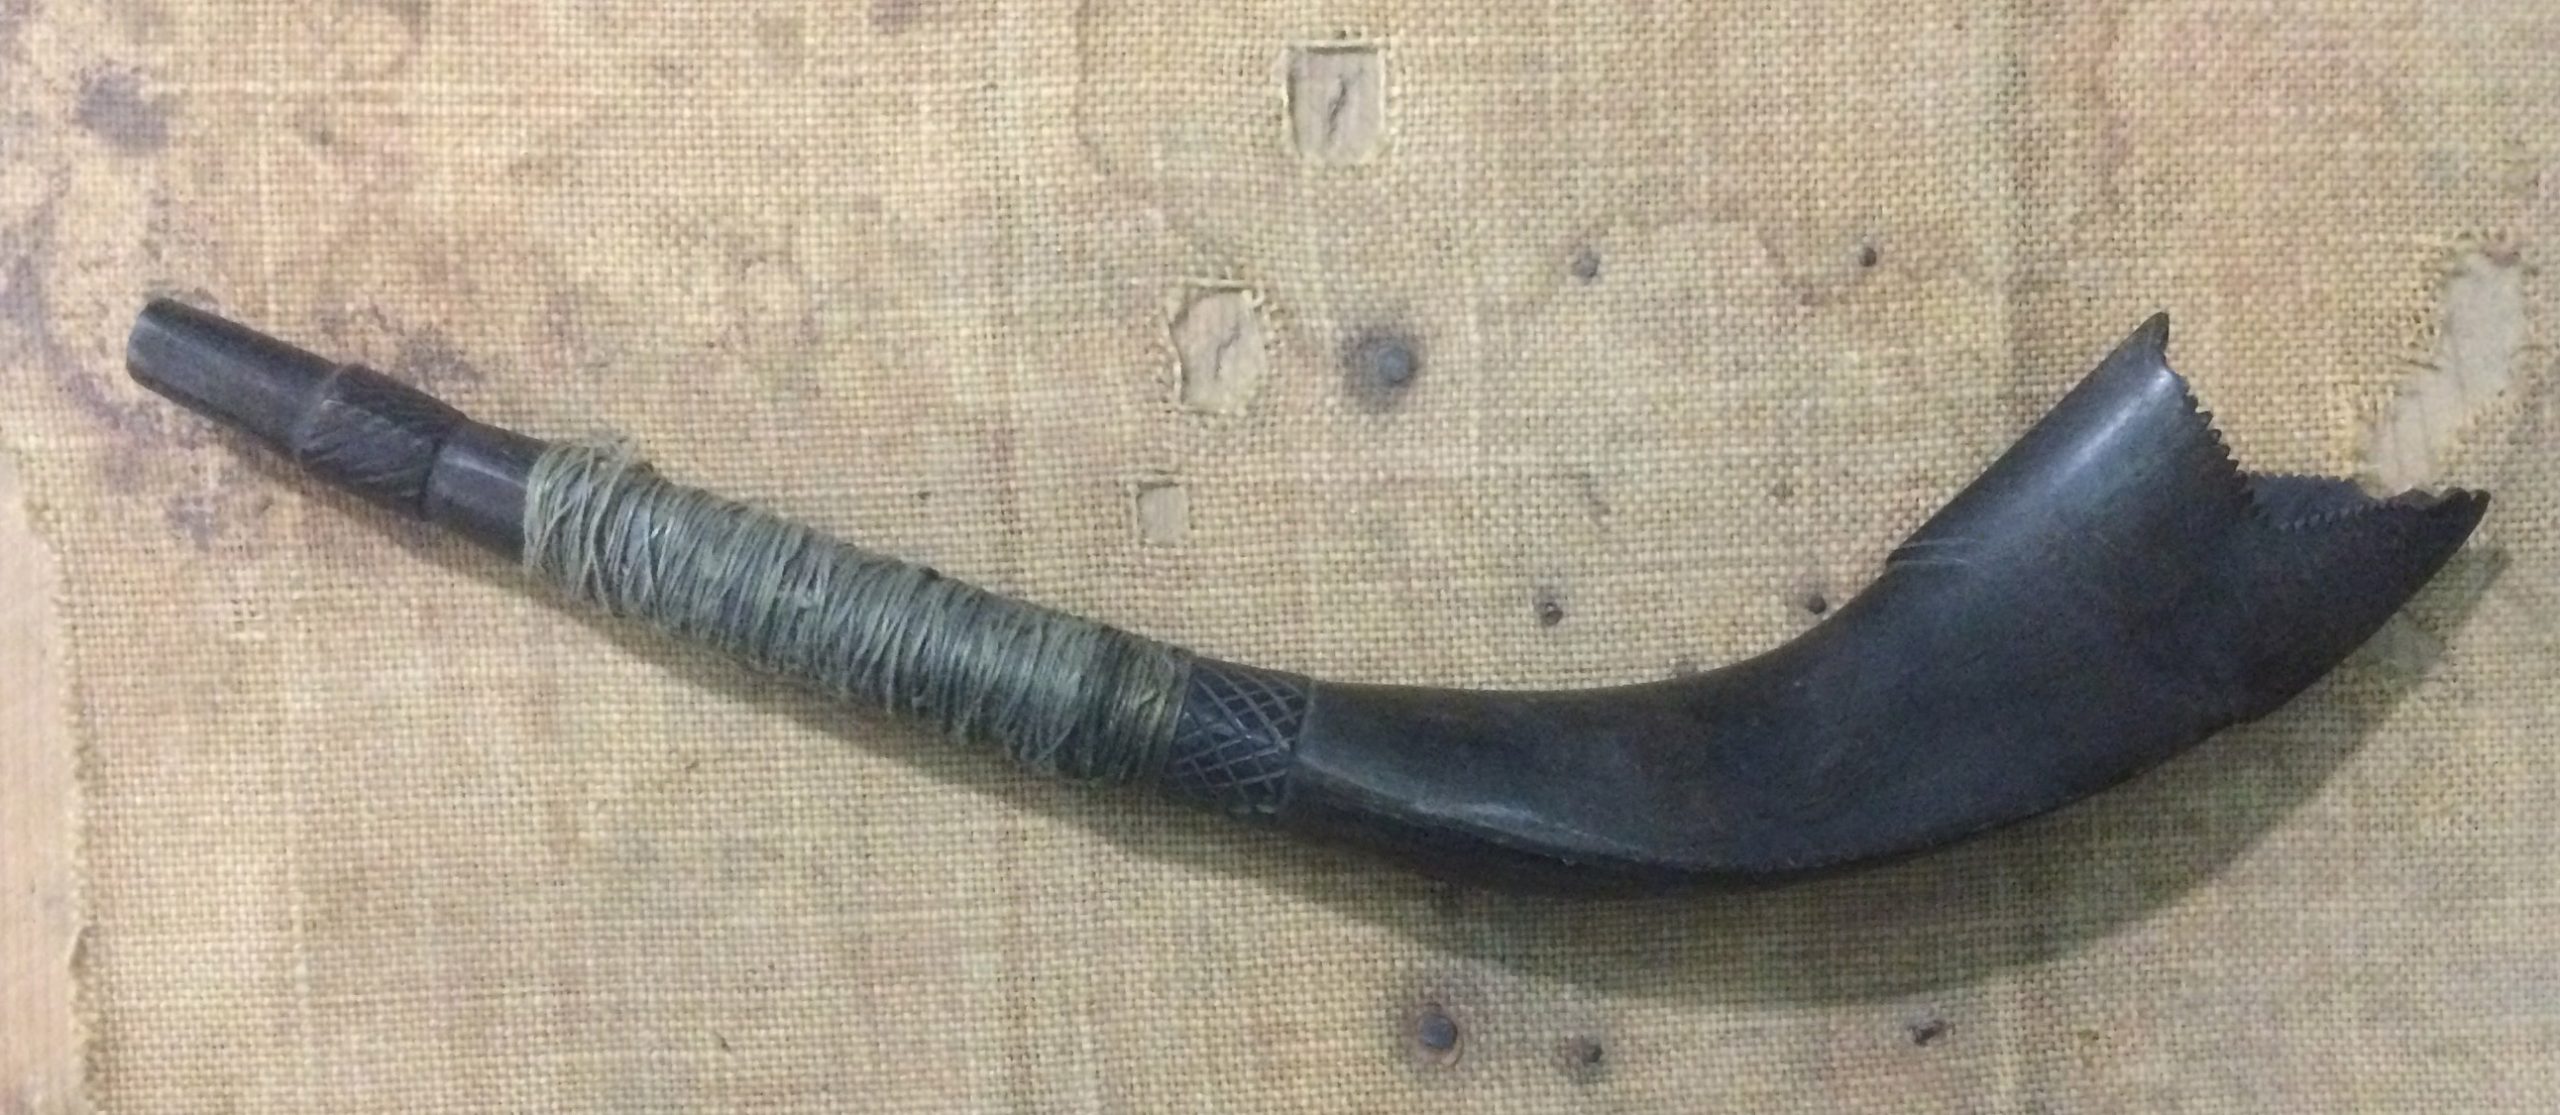 Was this shofar blown on the Sabbath? A black shofar tied with a leather thong, discovered in the basement of the Sephardic synagogue in Sofia, Bulgaria